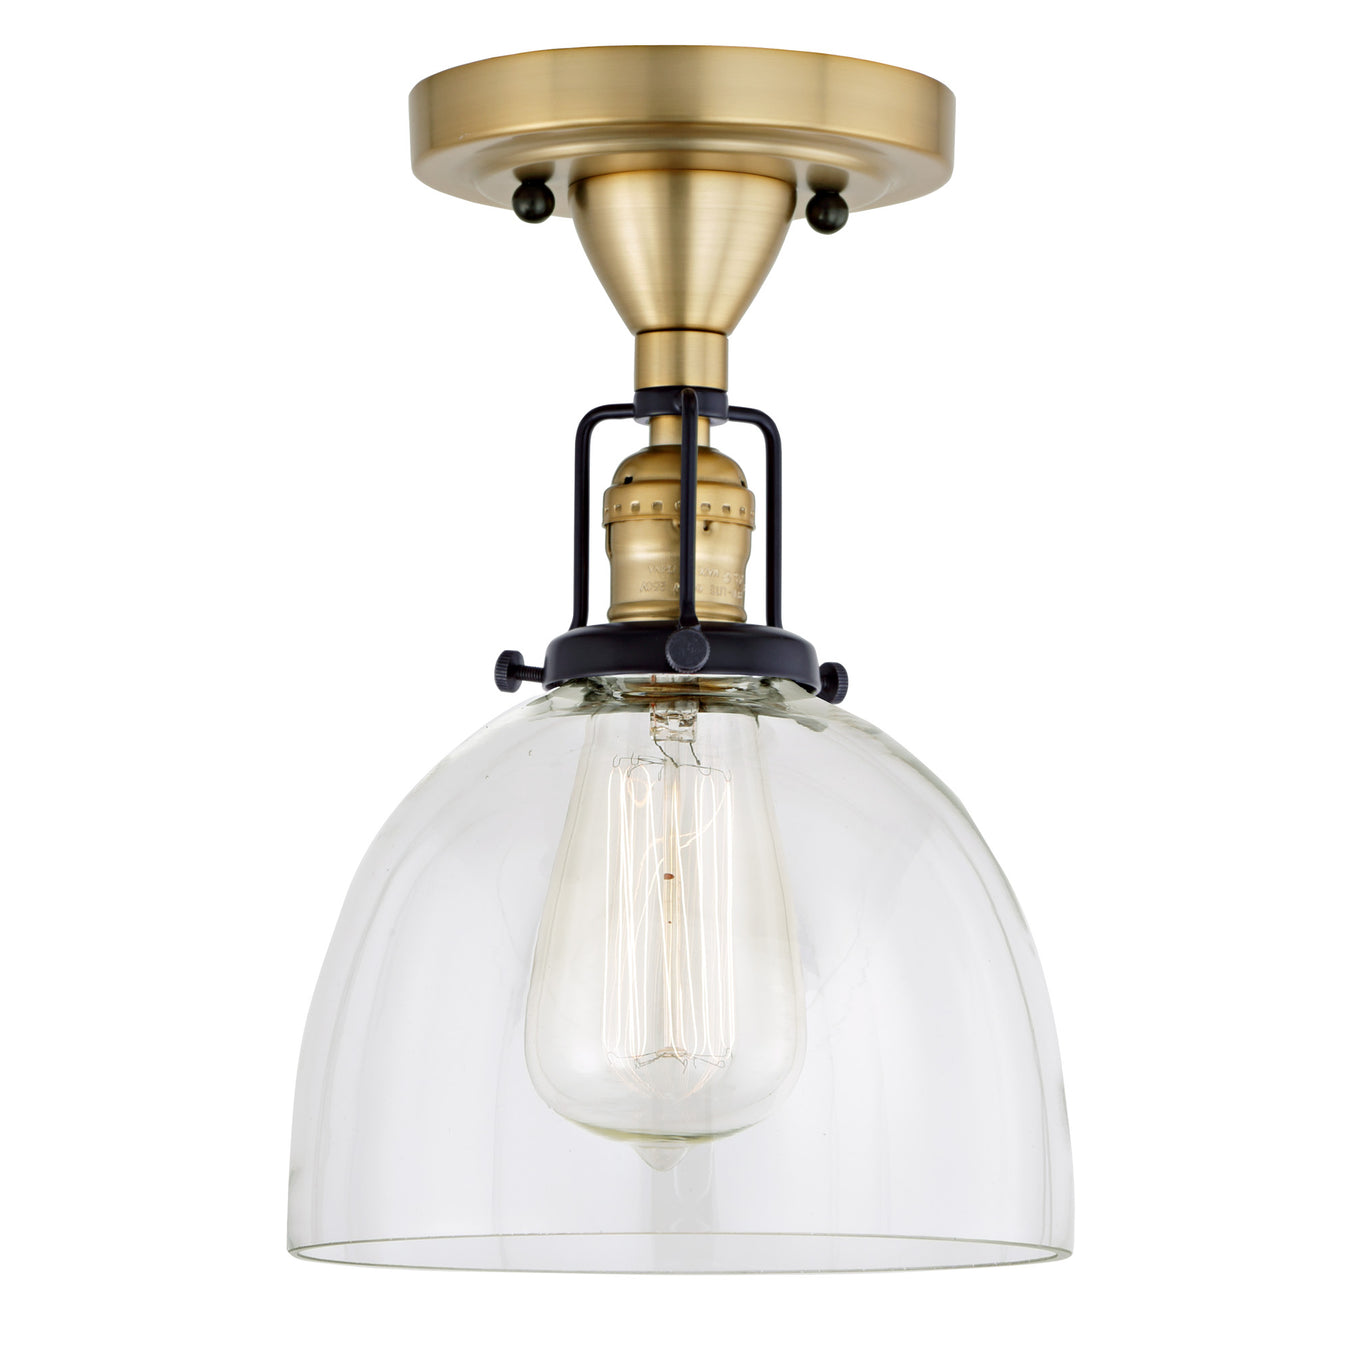 Uptown 1-Light Vida Ceiling Mount in Satin Brass & Black with Clear Glass